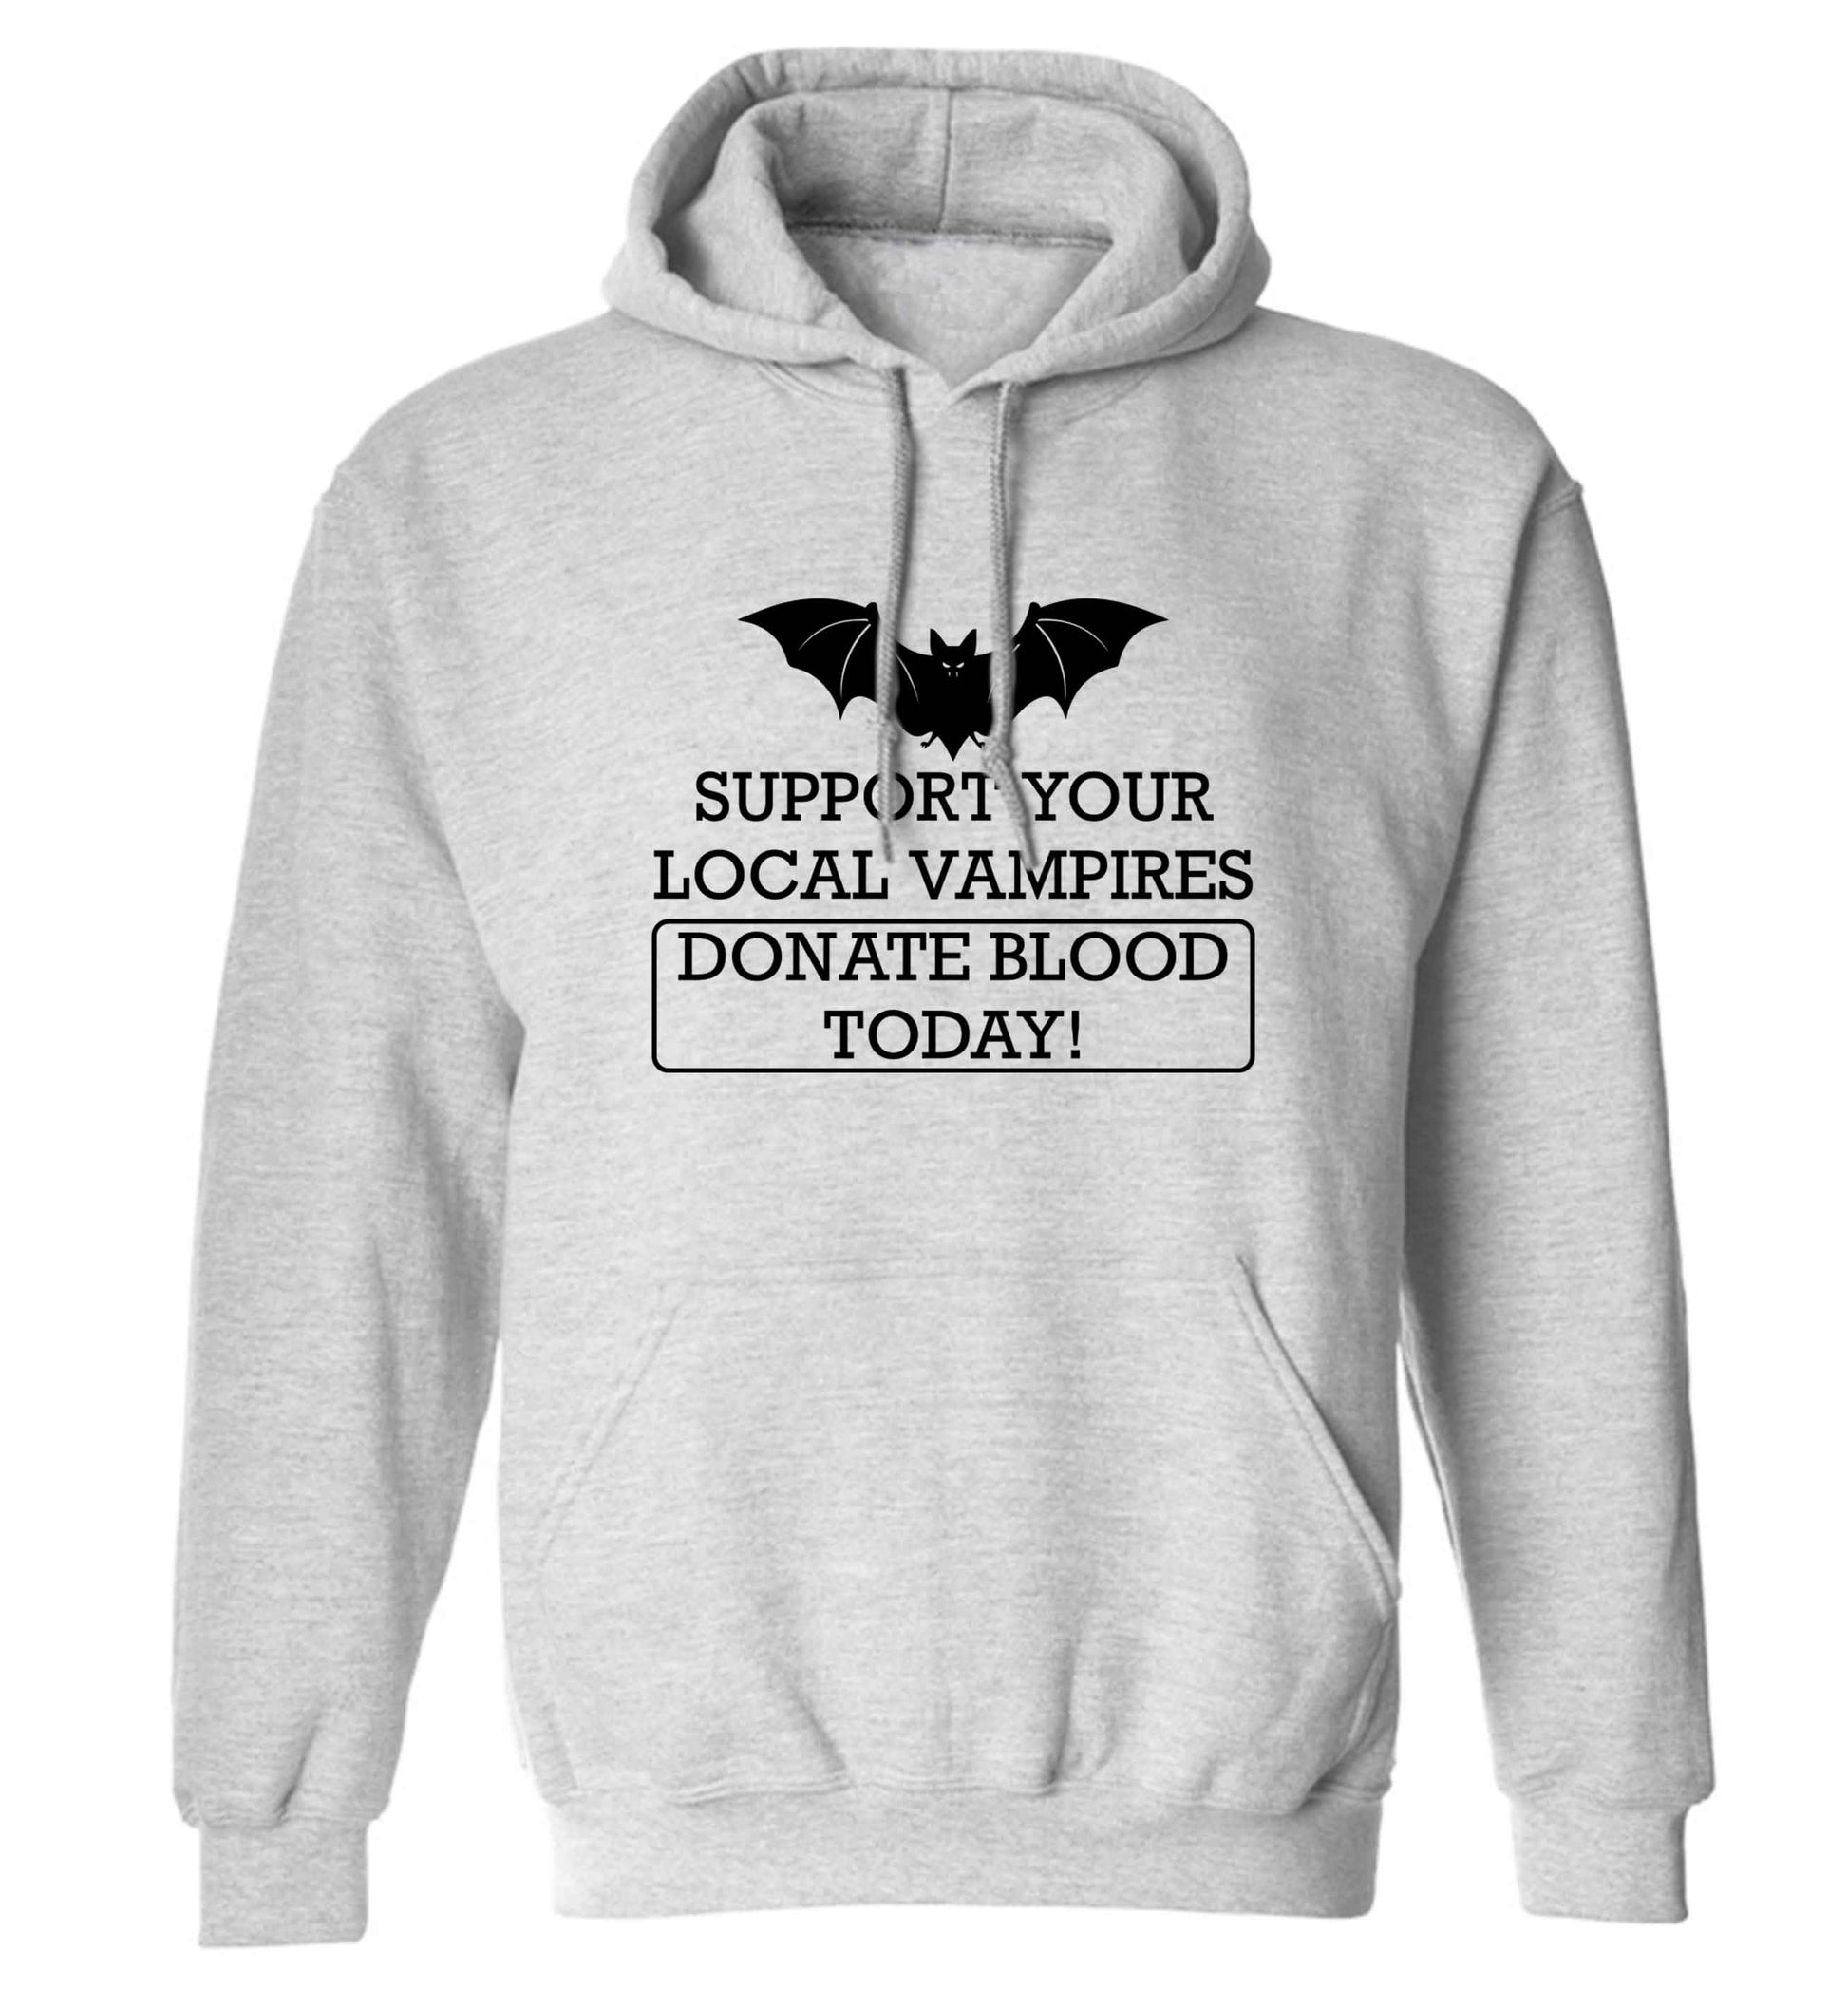 Support your local vampires donate blood today! adults unisex grey hoodie 2XL